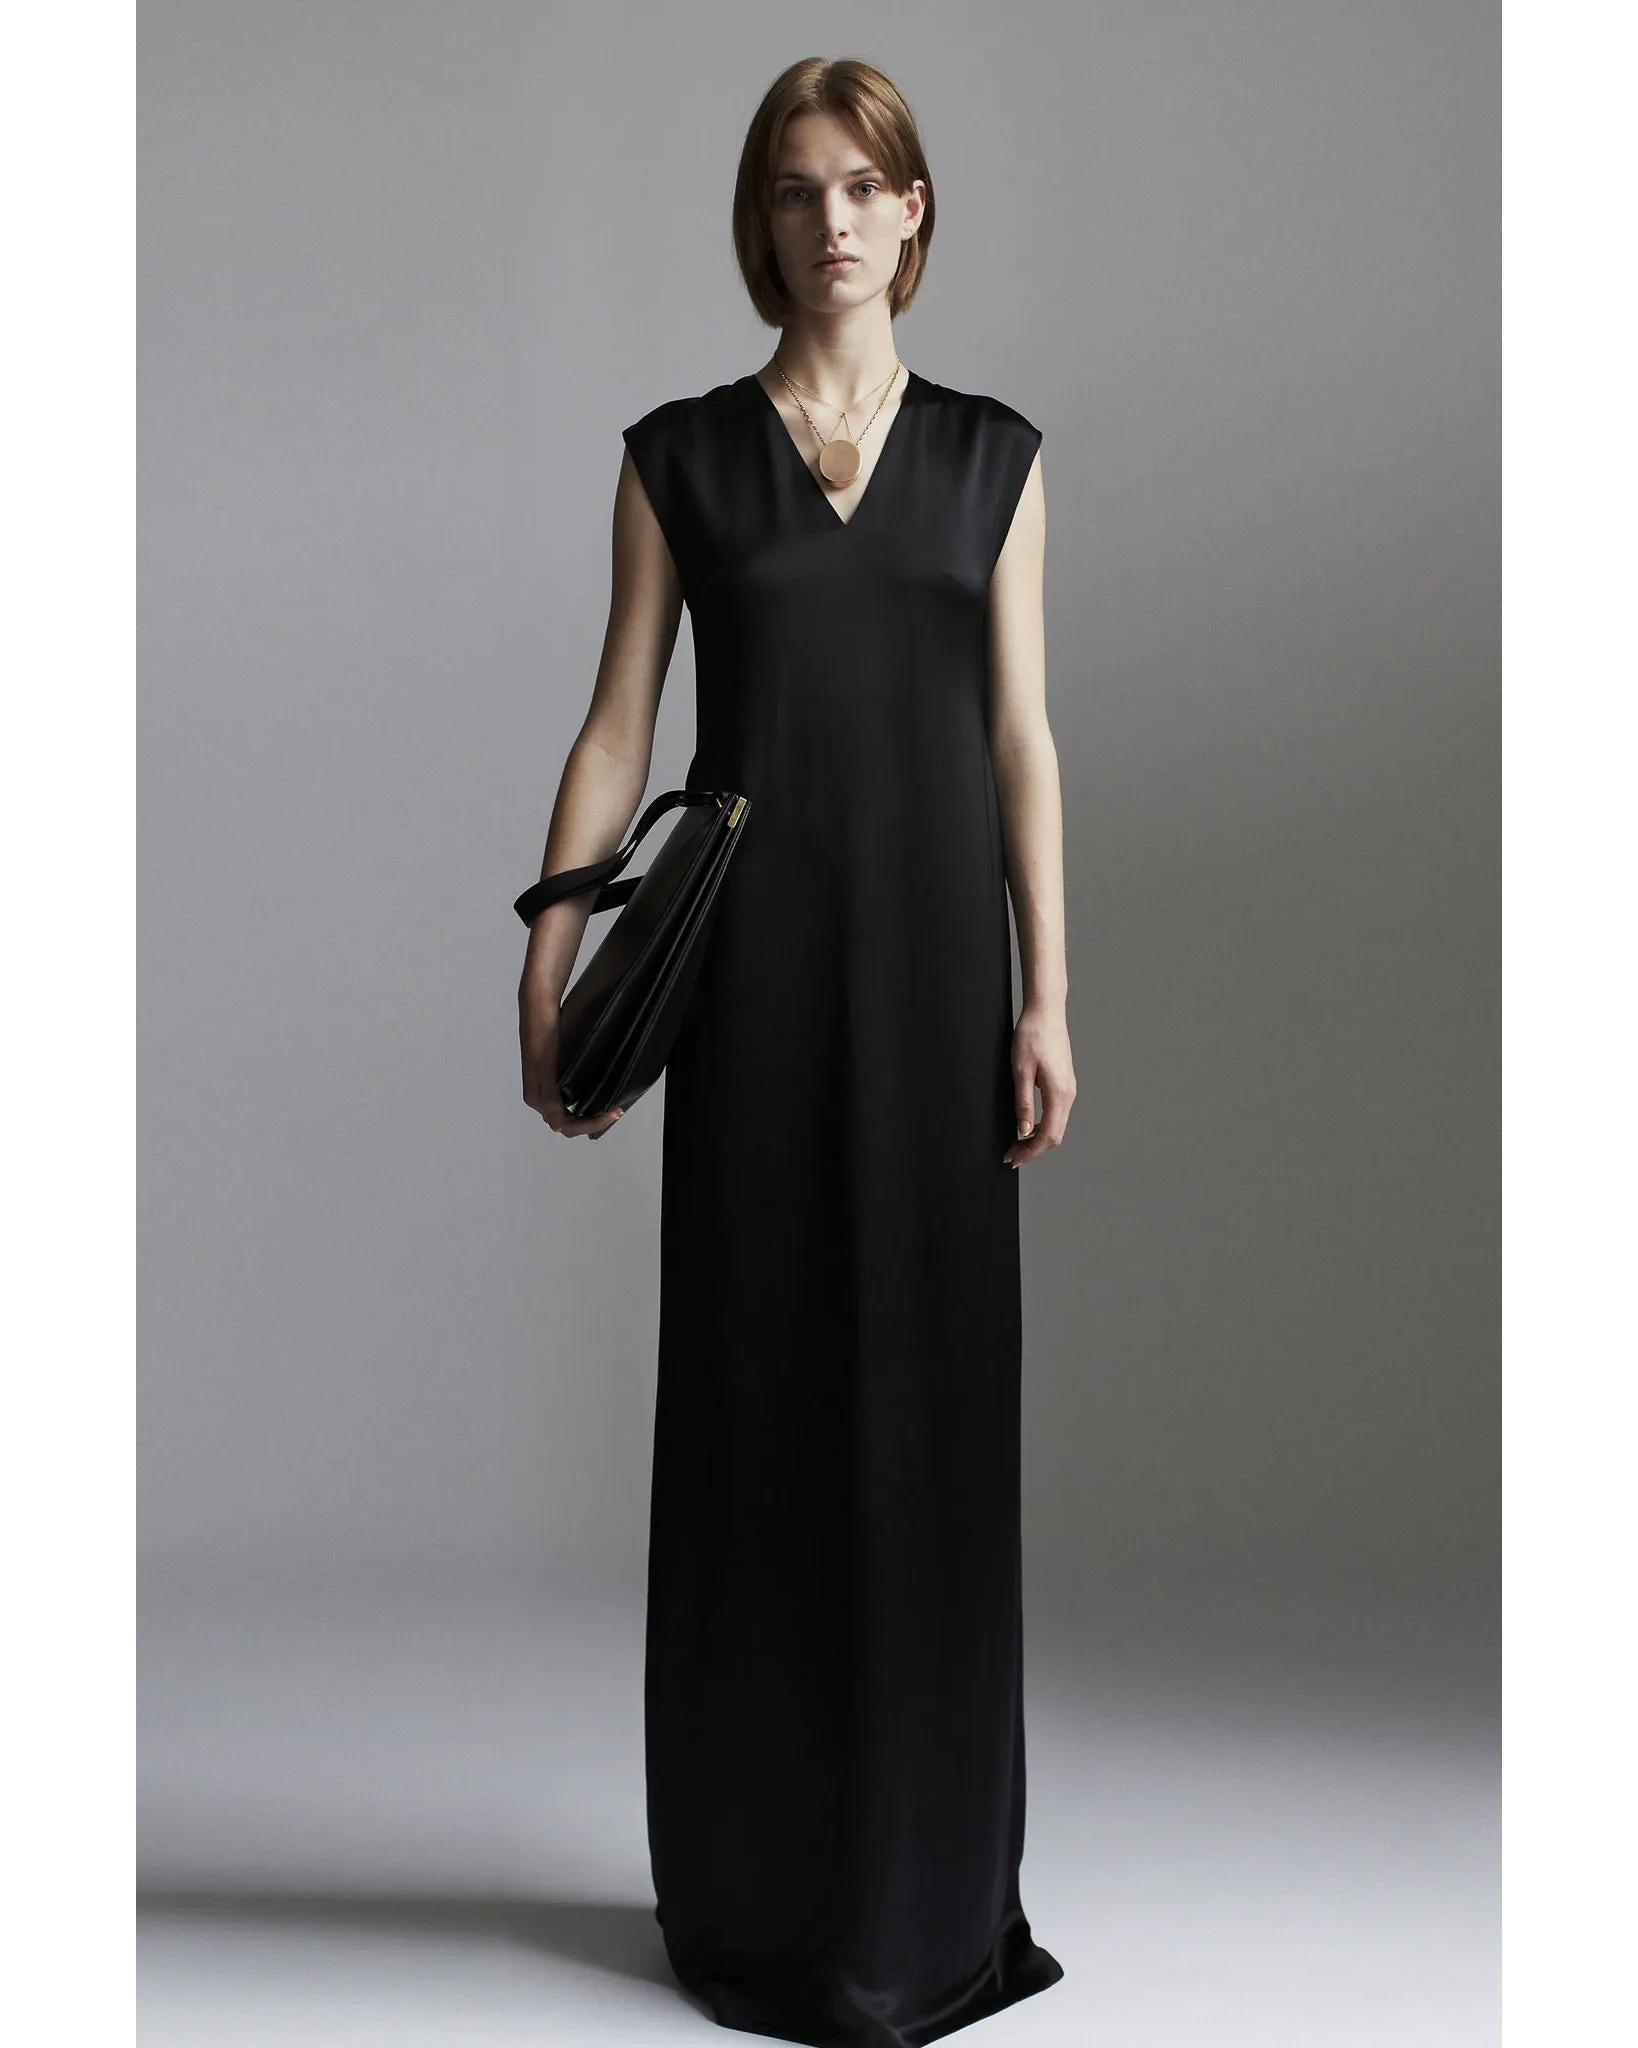 Resort 2014 Céline by Phoebe Philo silk satin cream maxi dress. Long cap sleeve v-neck maxi dress. As seen in the lookbook in black colorway (final look). Comes with original tags.